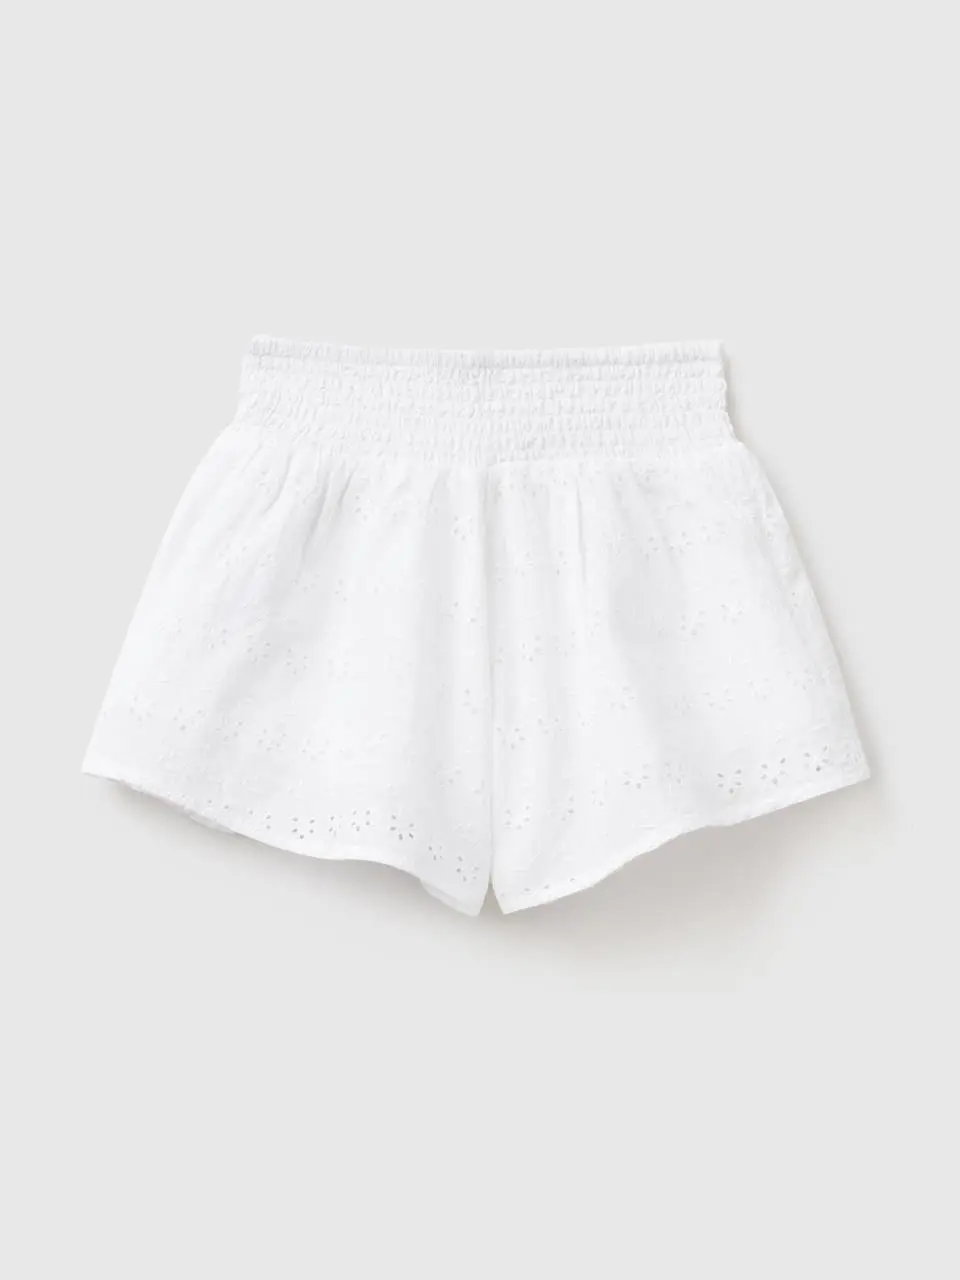 Benetton butterfly shorts with broderie anglaise embroidery. 1